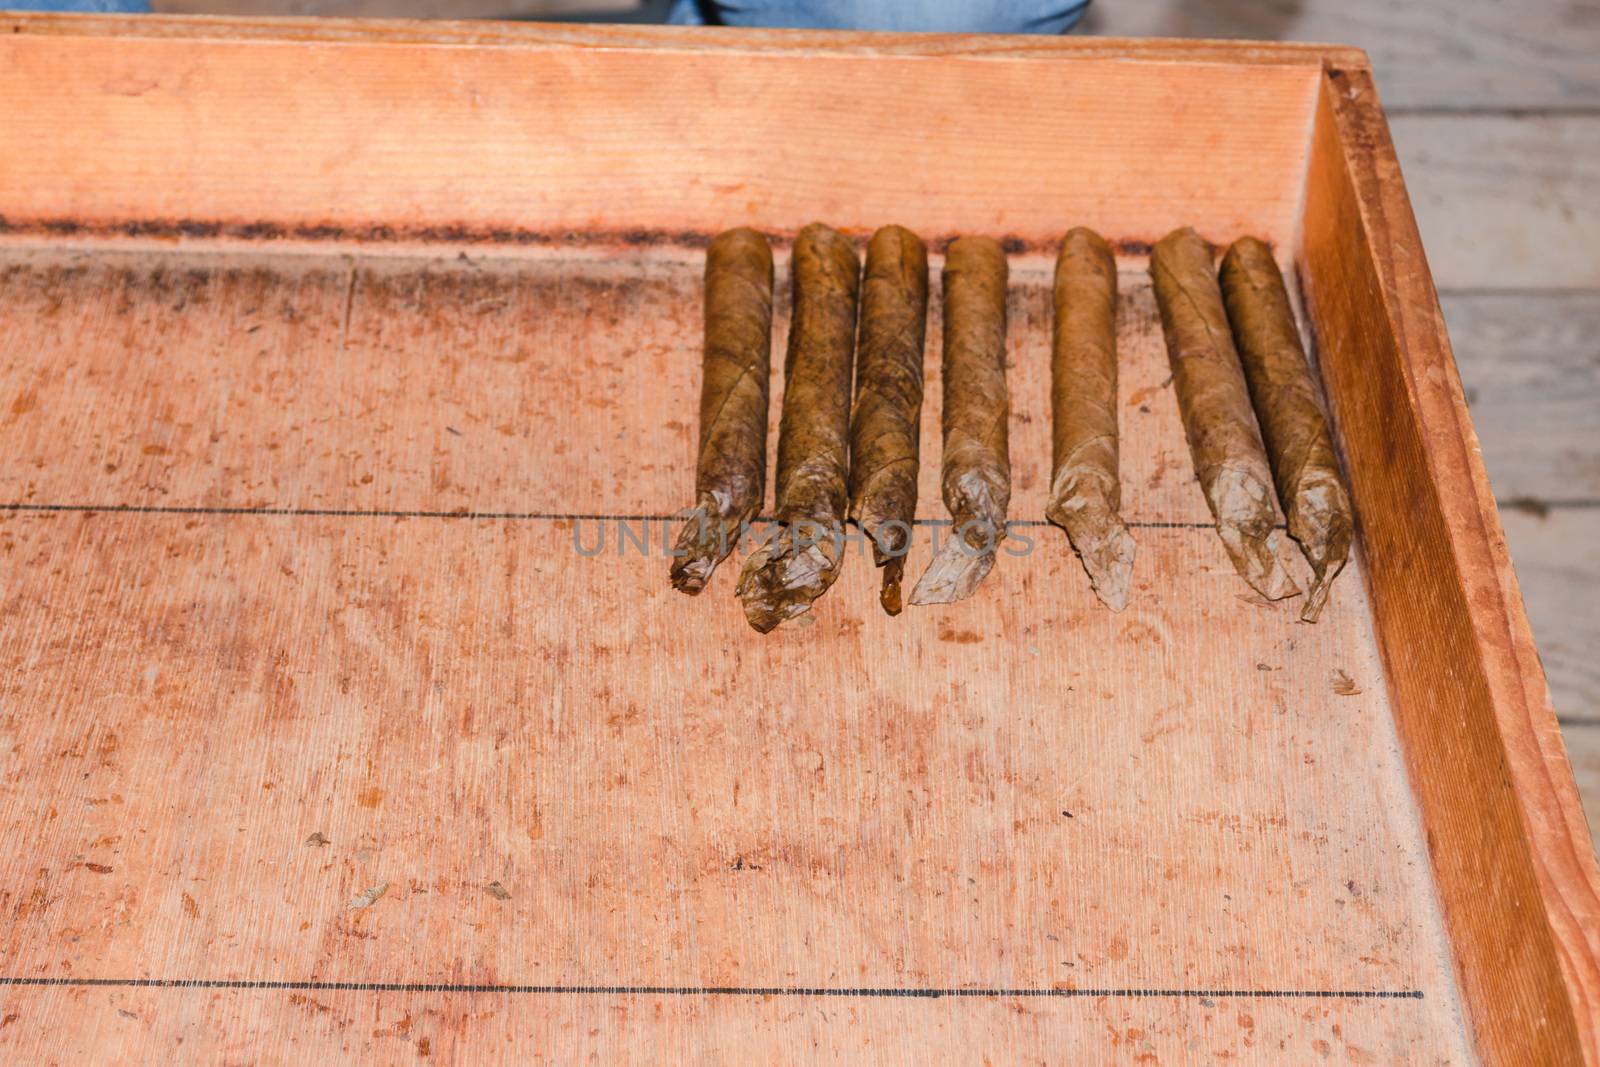 Traditional manufacture of cigars in an old tobacco factory in Havana in Cuba.